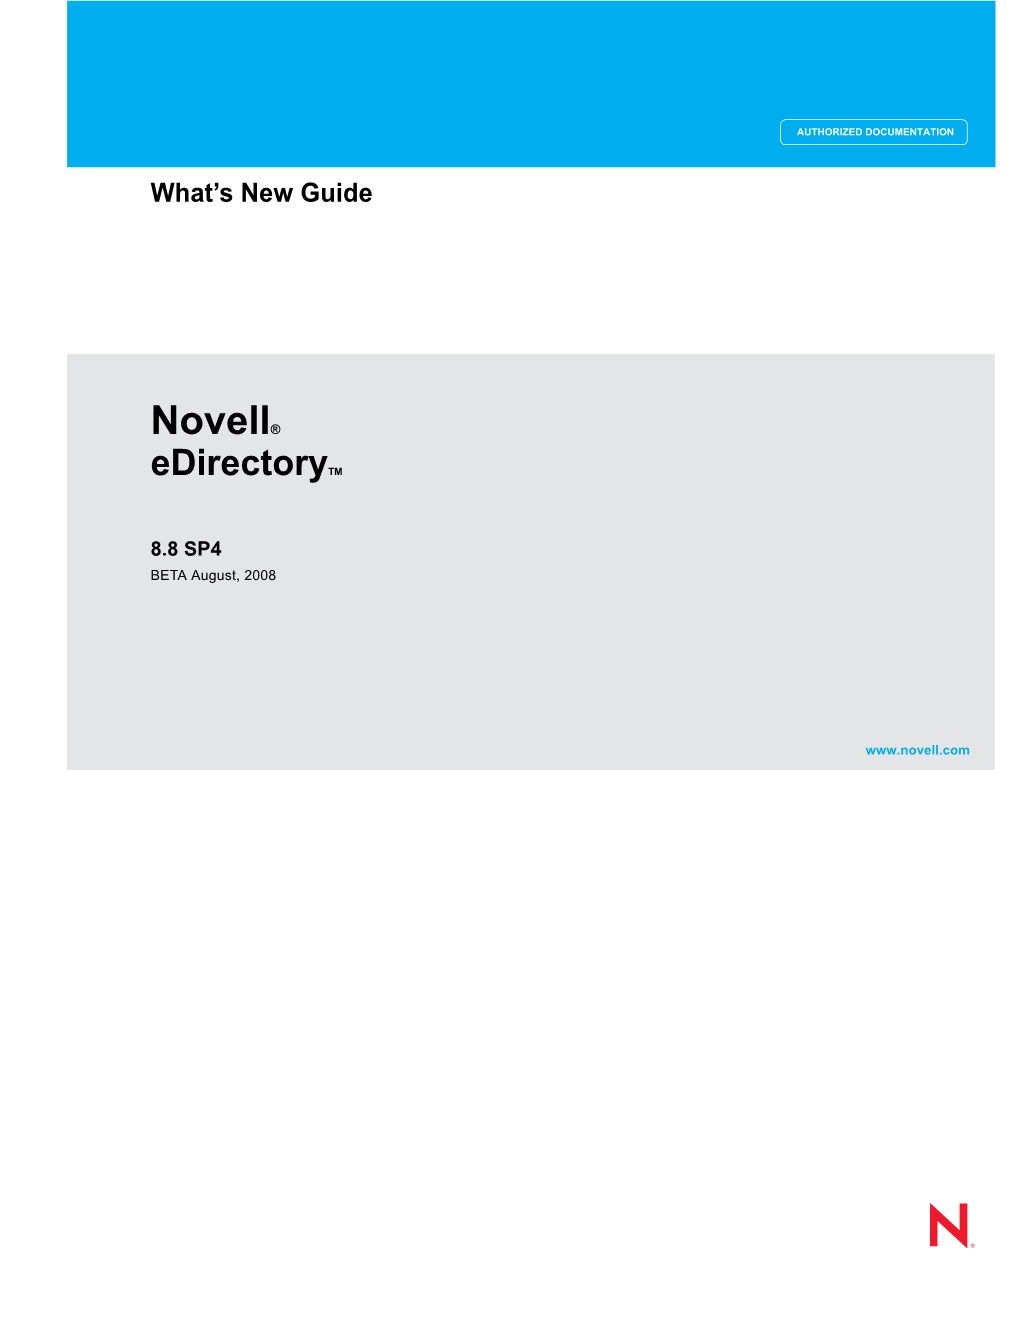 Novell Edirectory 8.8 What's New Guide Novdocx (En) 11 July 2008 Onry End Uses